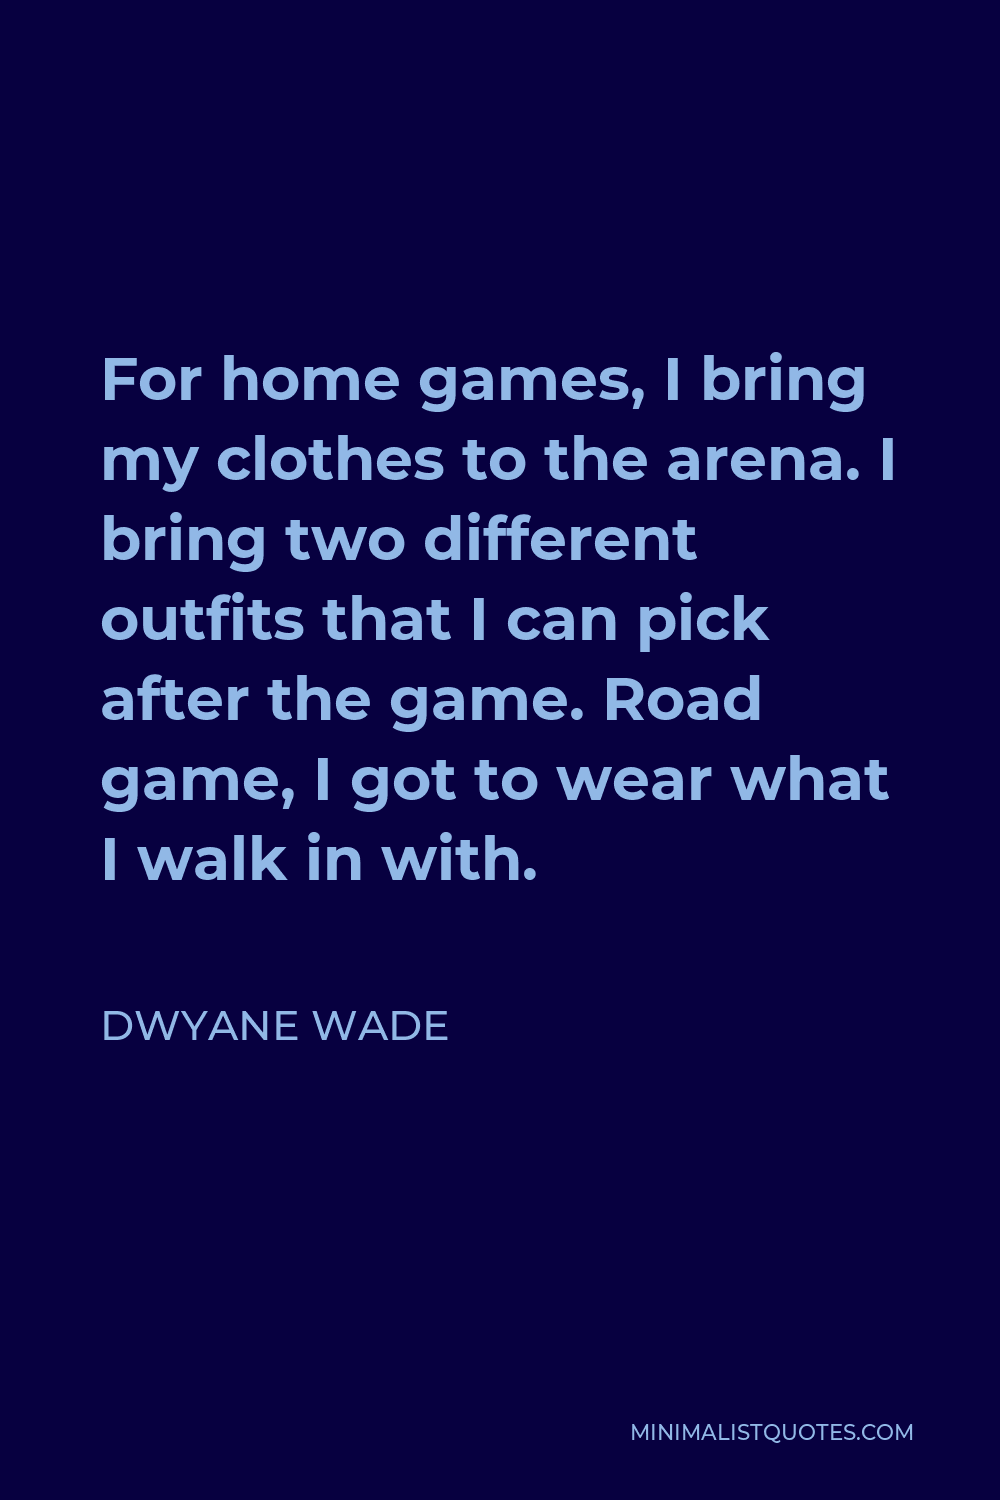 Dwyane Wade Quote - For home games, I bring my clothes to the arena. I bring two different outfits that I can pick after the game. Road game, I got to wear what I walk in with.